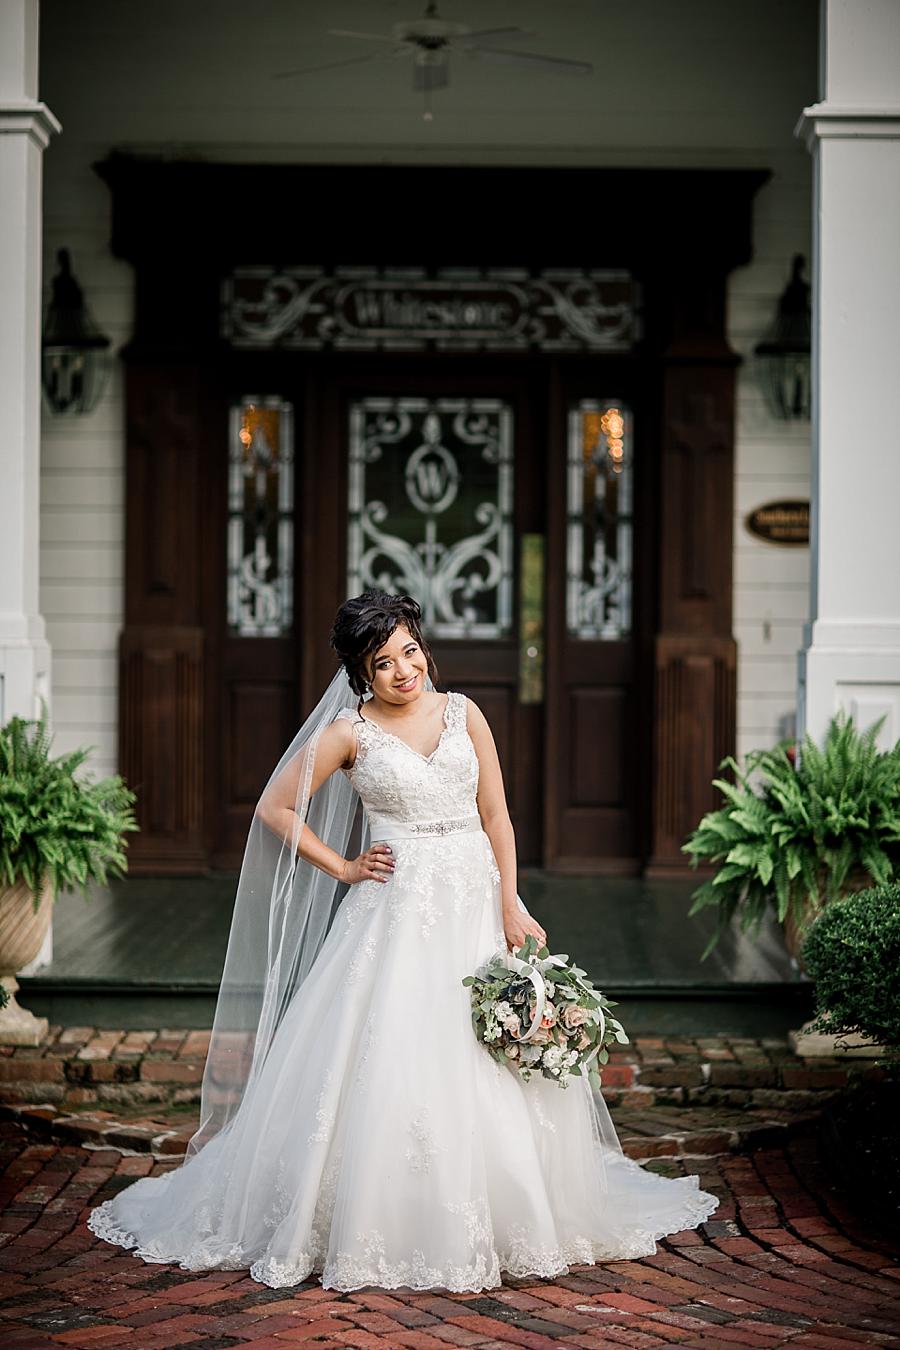 Hand on hip at this Whitestone Country Inn bridal session by Knoxville Wedding Photographer, Amanda May Photos.